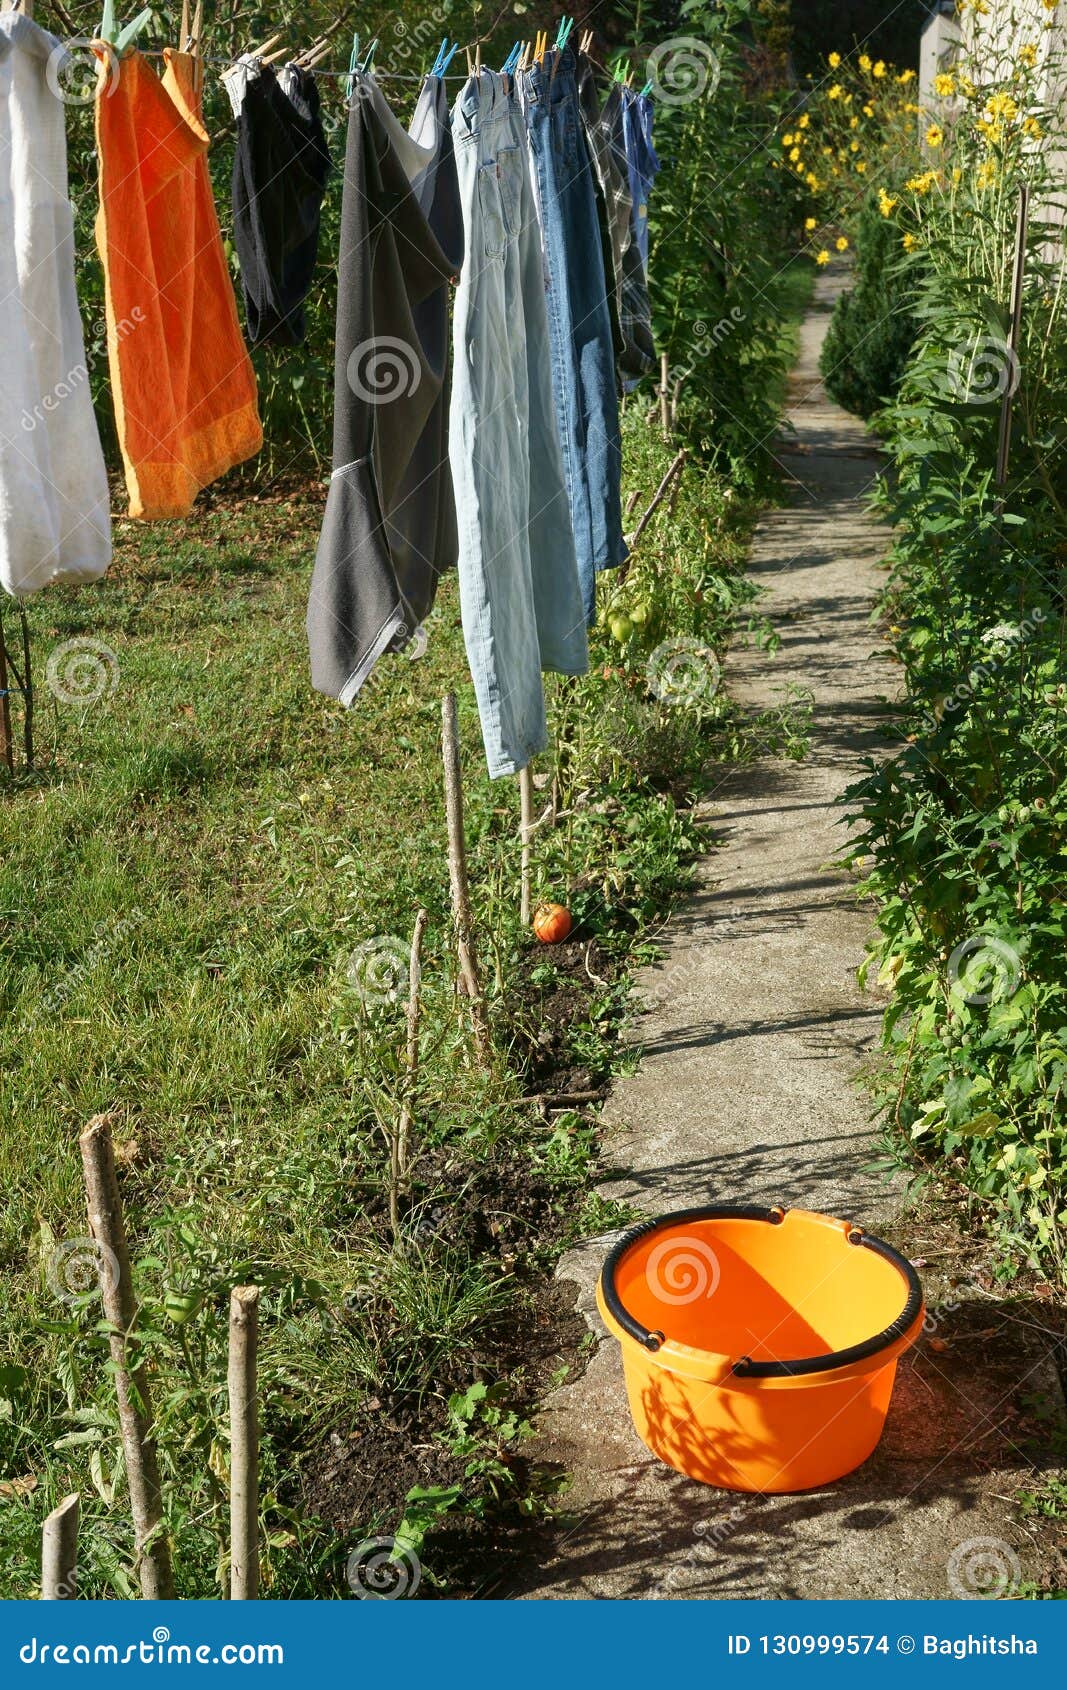 Laundry Hanging To Dry Garden Flowers Sunlight Stock Photo - Image of ...